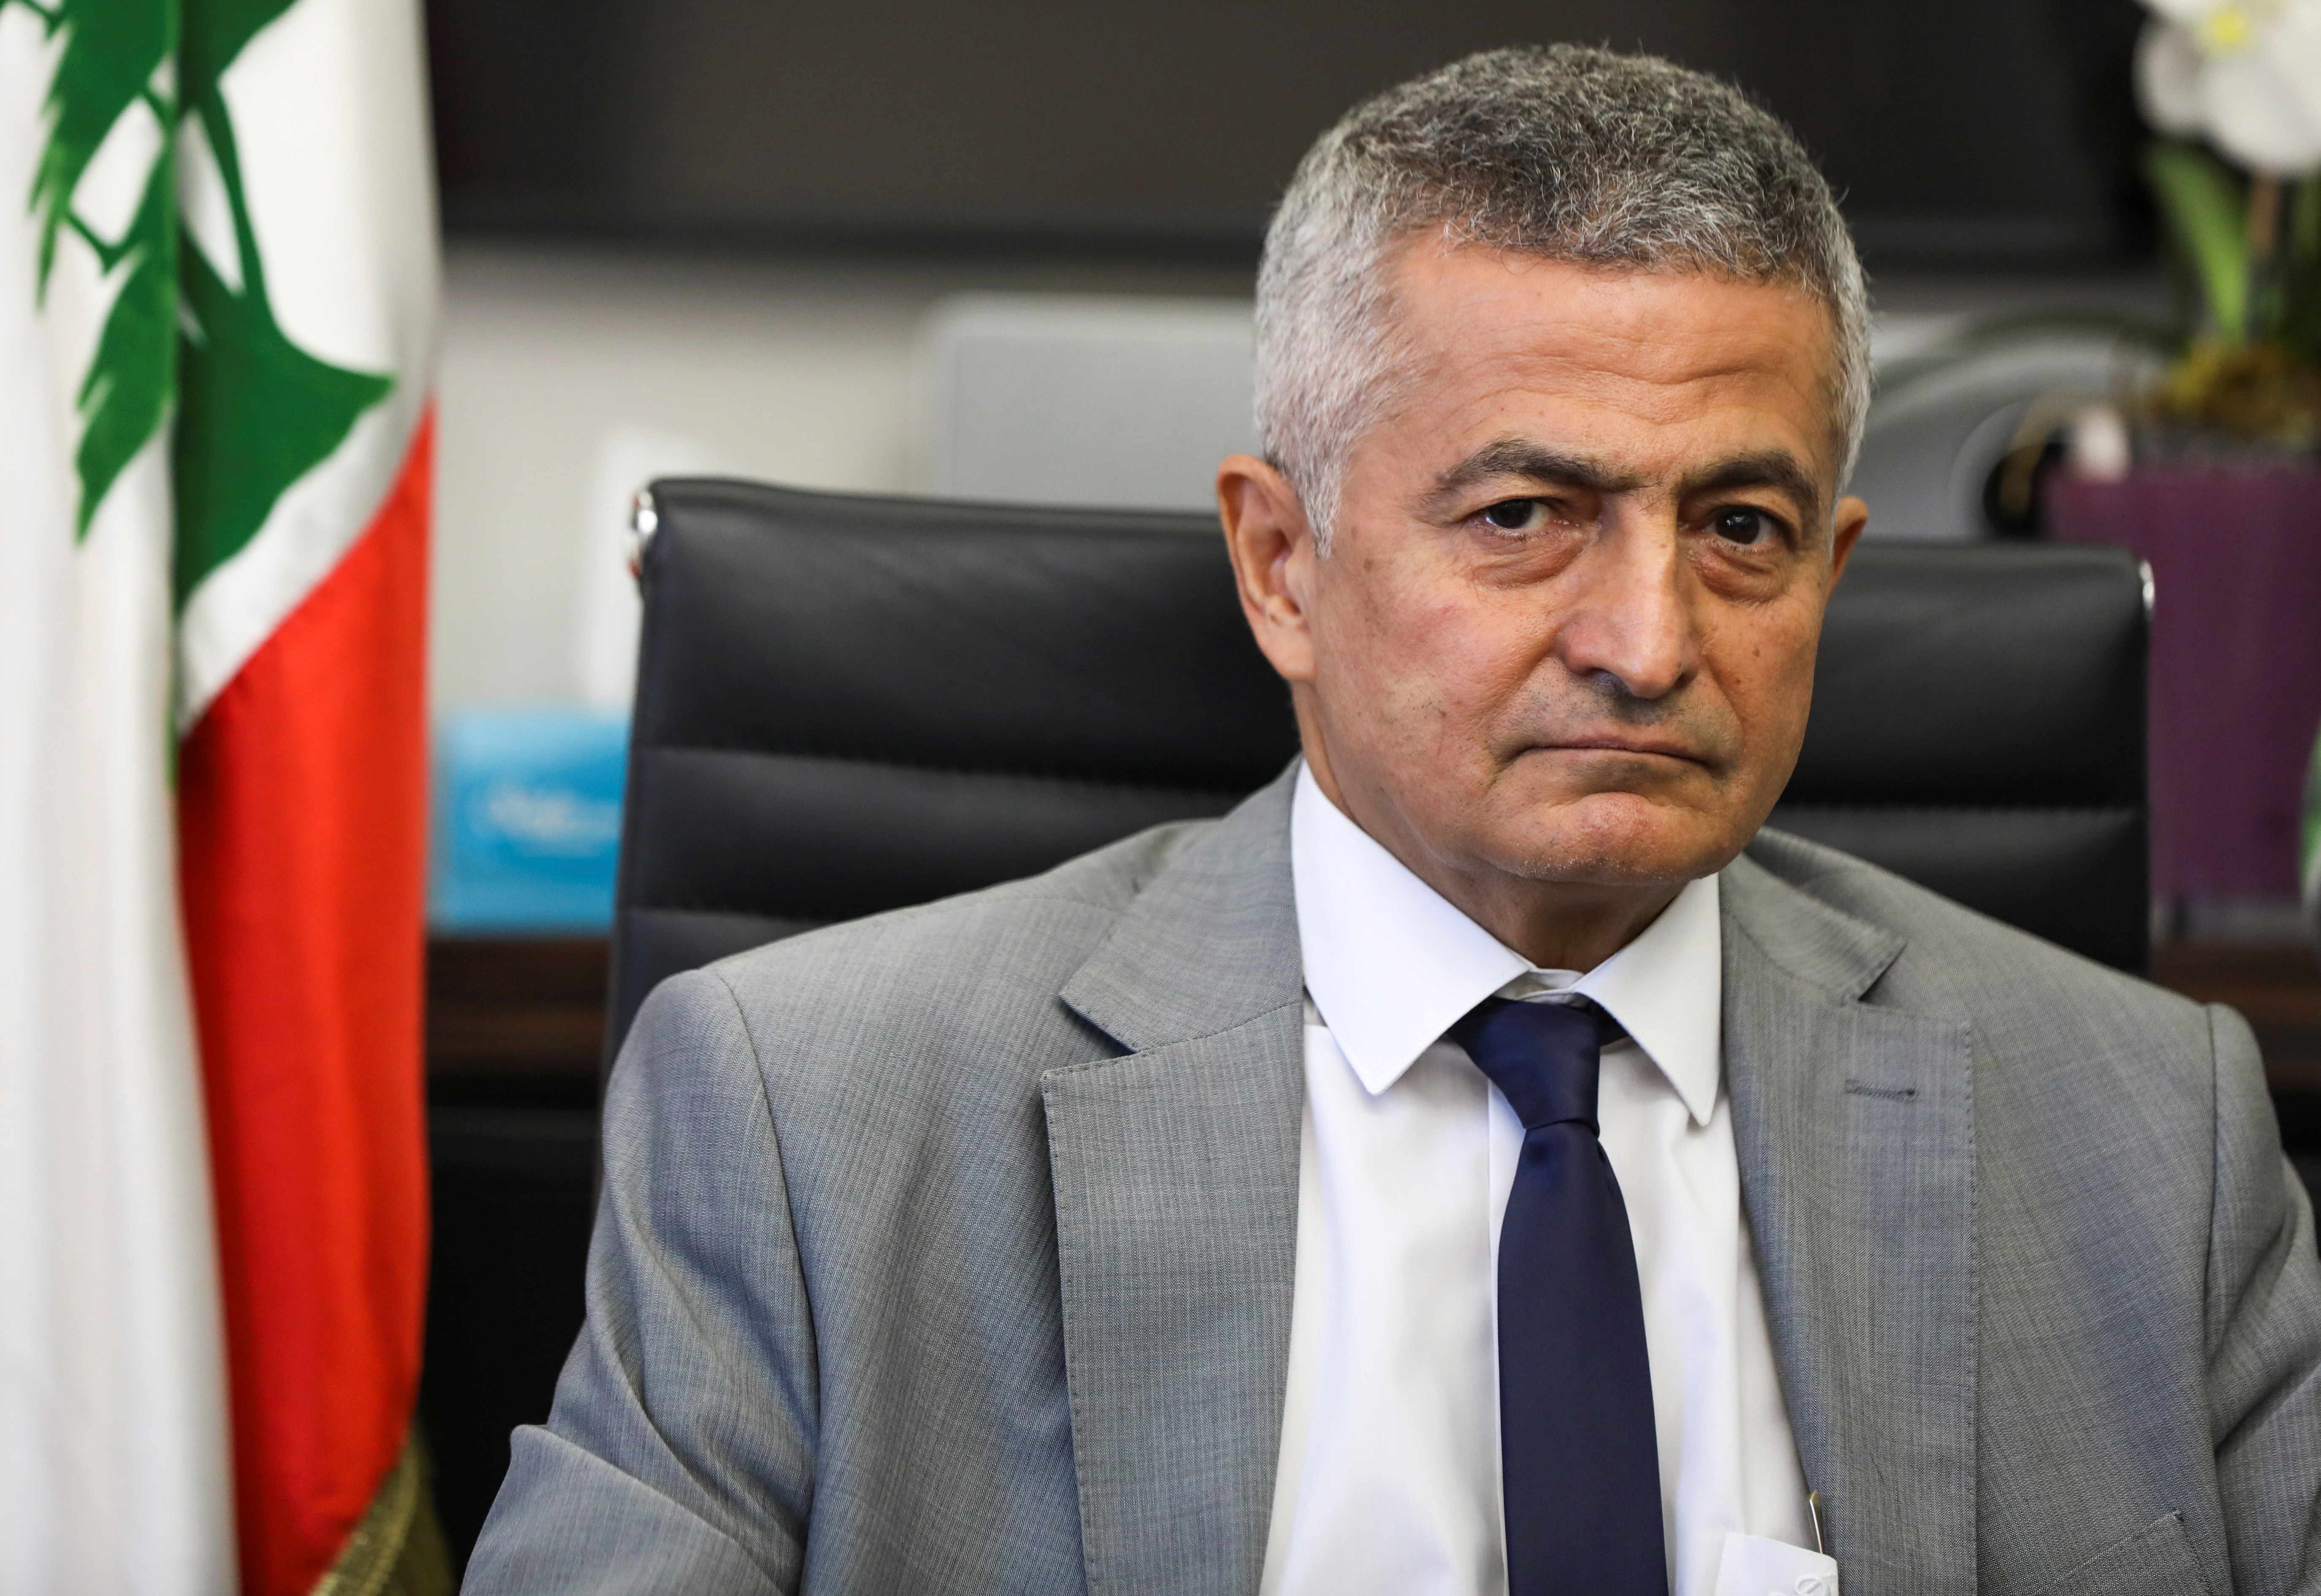 Lebanon's newly appointed Finance Minister Youssef Khalil looks on during a handover ceremony in Beirut